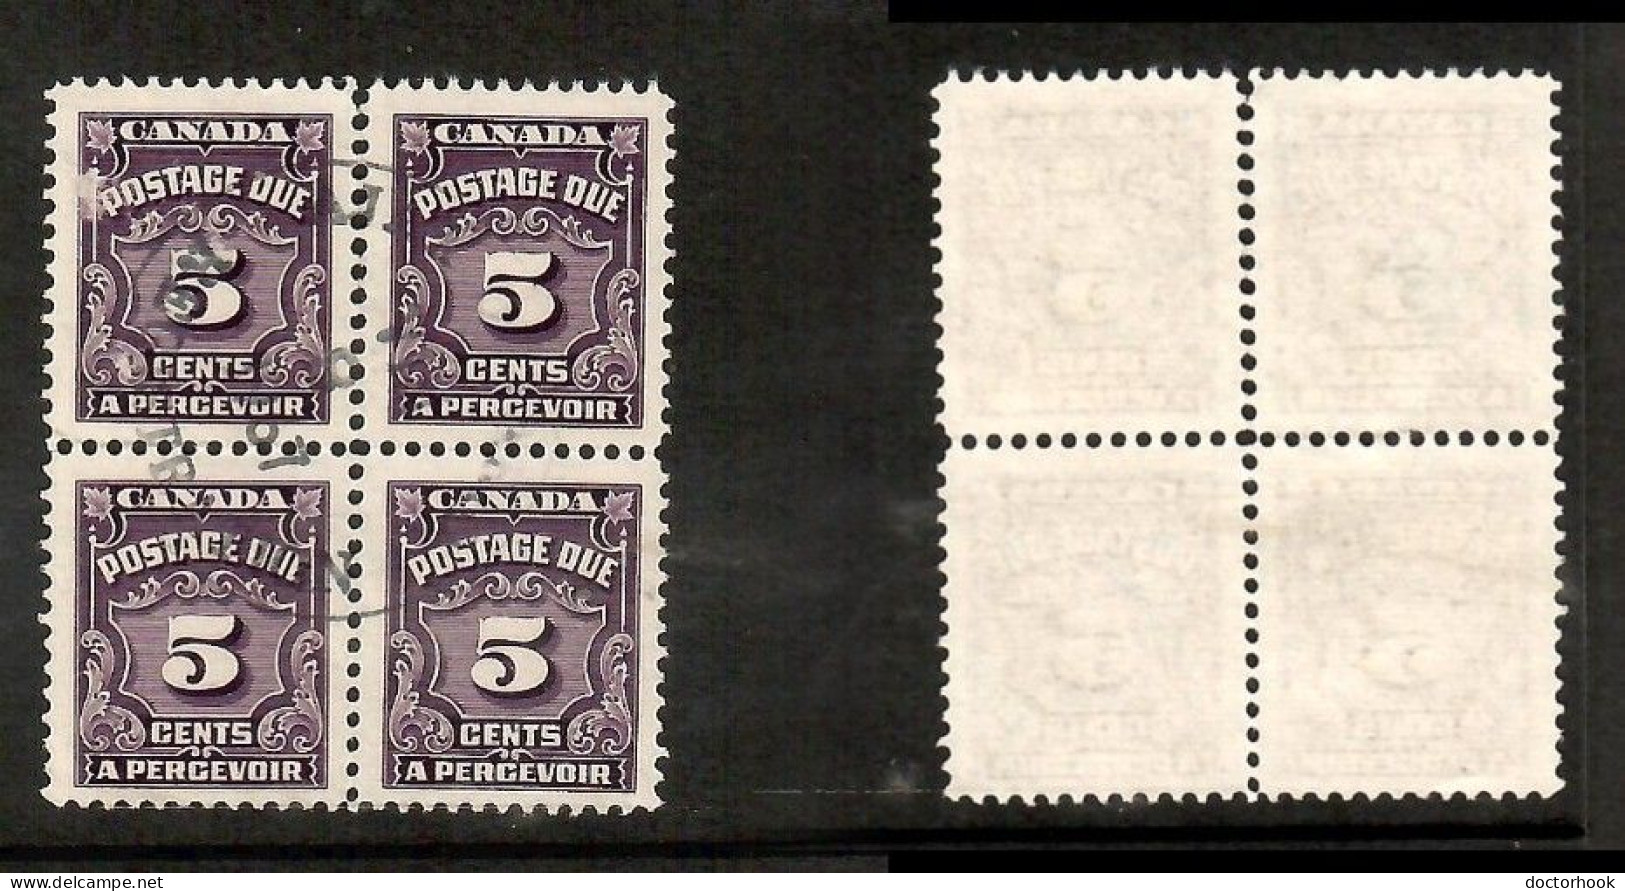 CANADA   Scott # J 18 USED BLOCK Of 4 (CONDITION AS PER SCAN) (CAN-202) - Blocs-feuillets